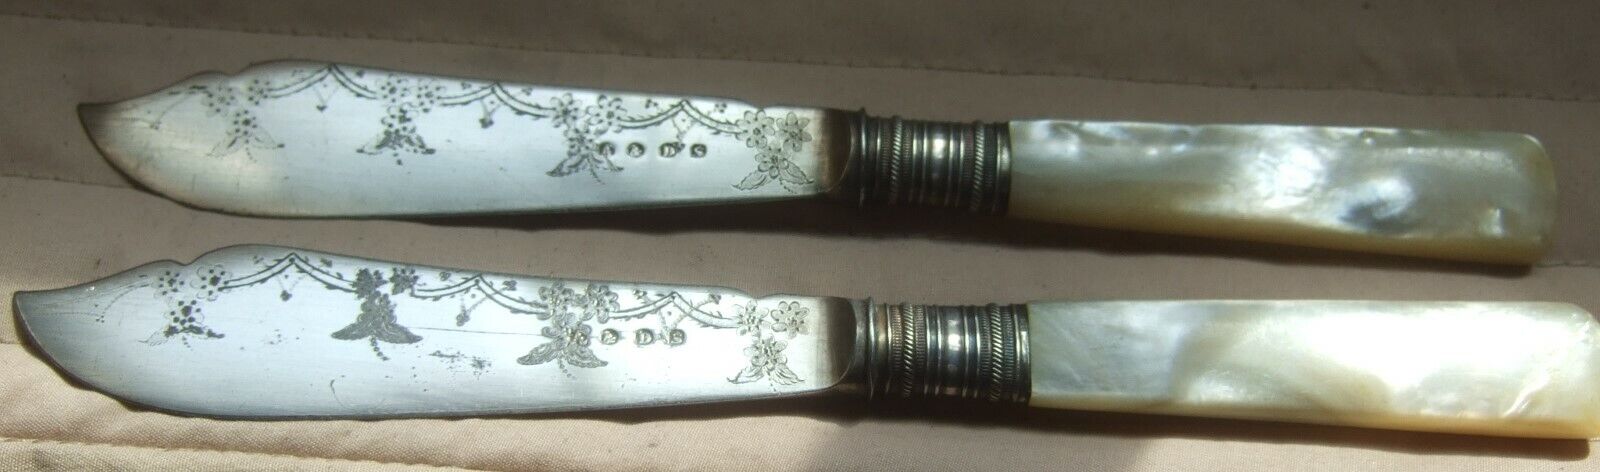 Pearl Handled Fish Knife or Butter Spreader (Two)